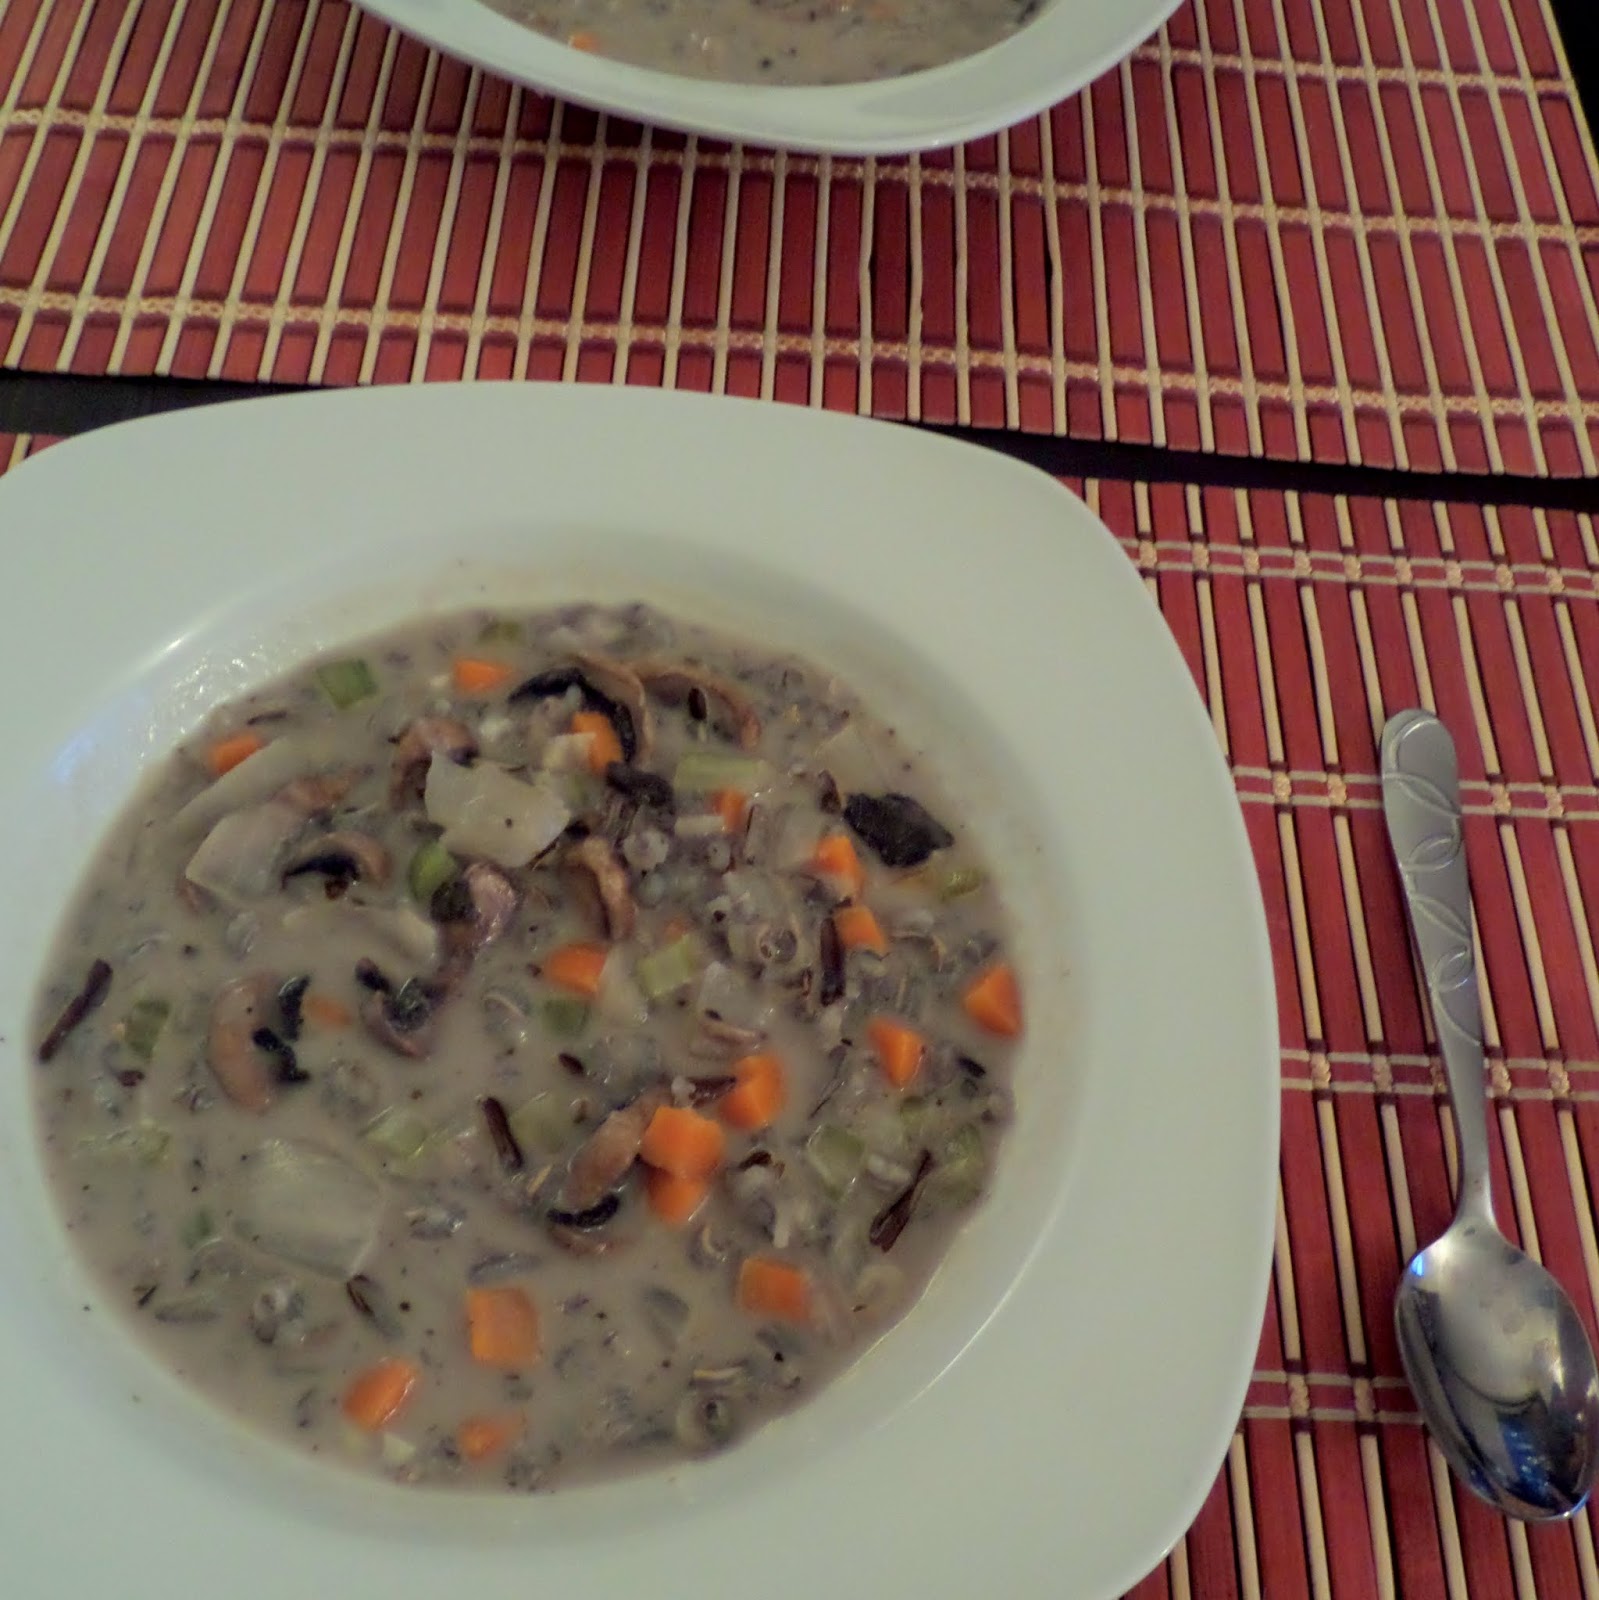 Mushroom and Wild Rice Soup:  A creamy, meatless, soup with mushrooms and wild rice.  It's warm comfort food for a cold night.